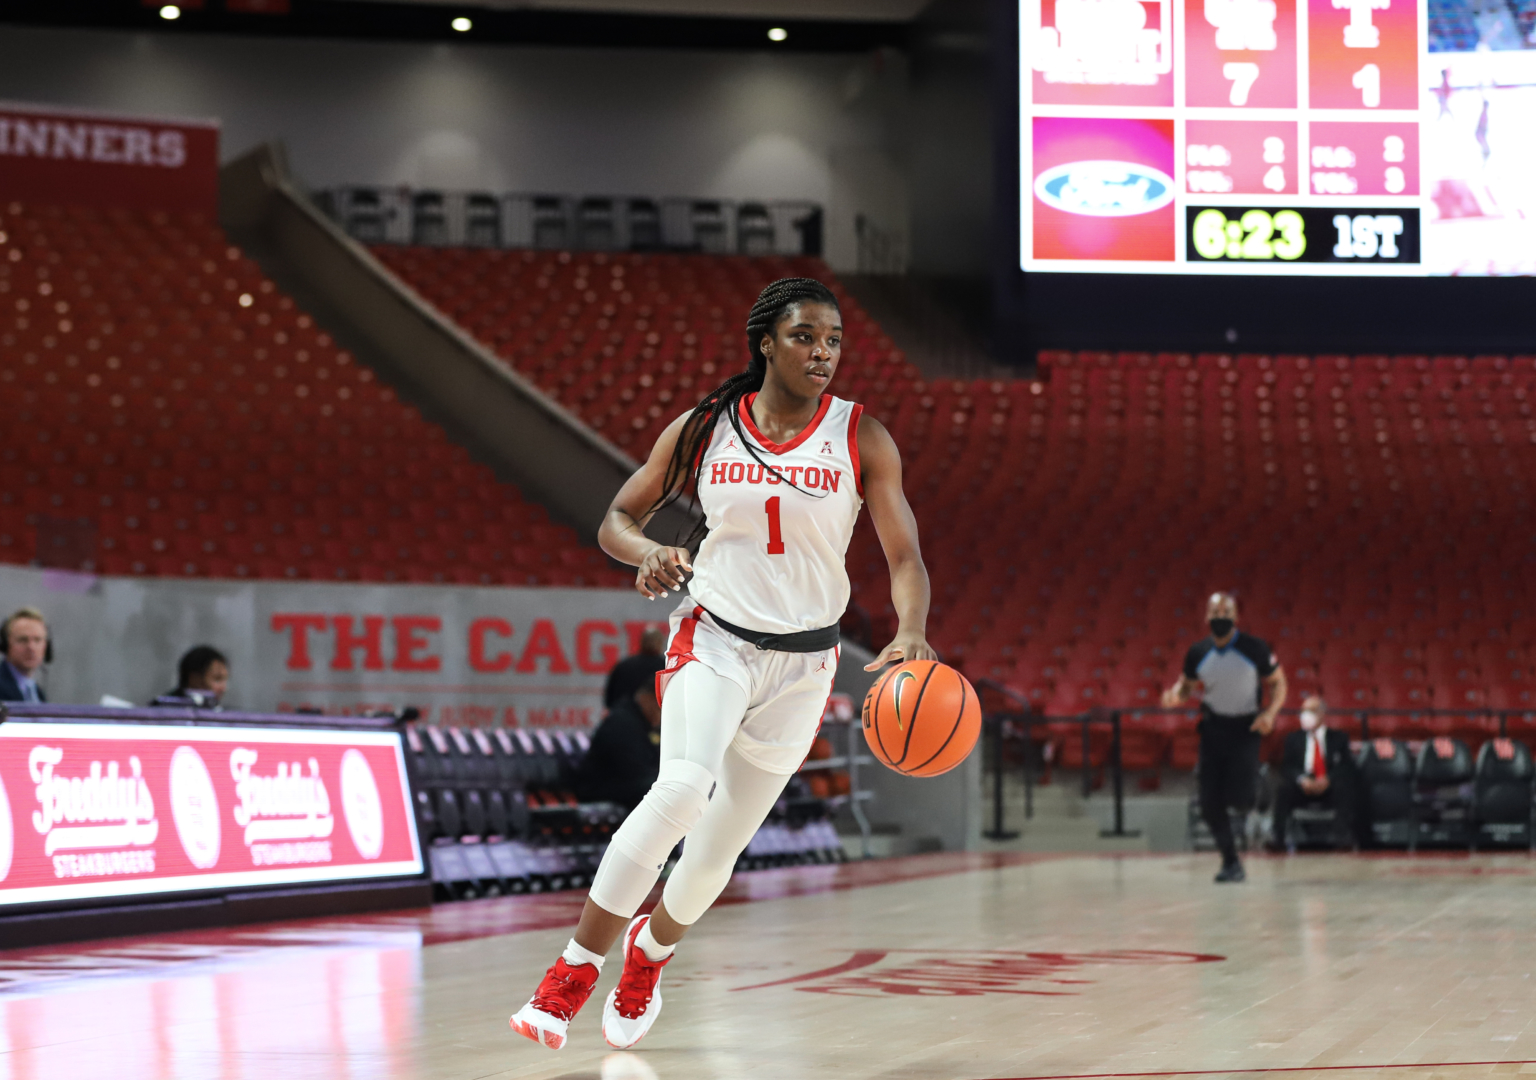 Senior forward Bria Patterson led UH women's basketball with 13 points in the Cougars' season opener. | Sean Thomas/The Cougar